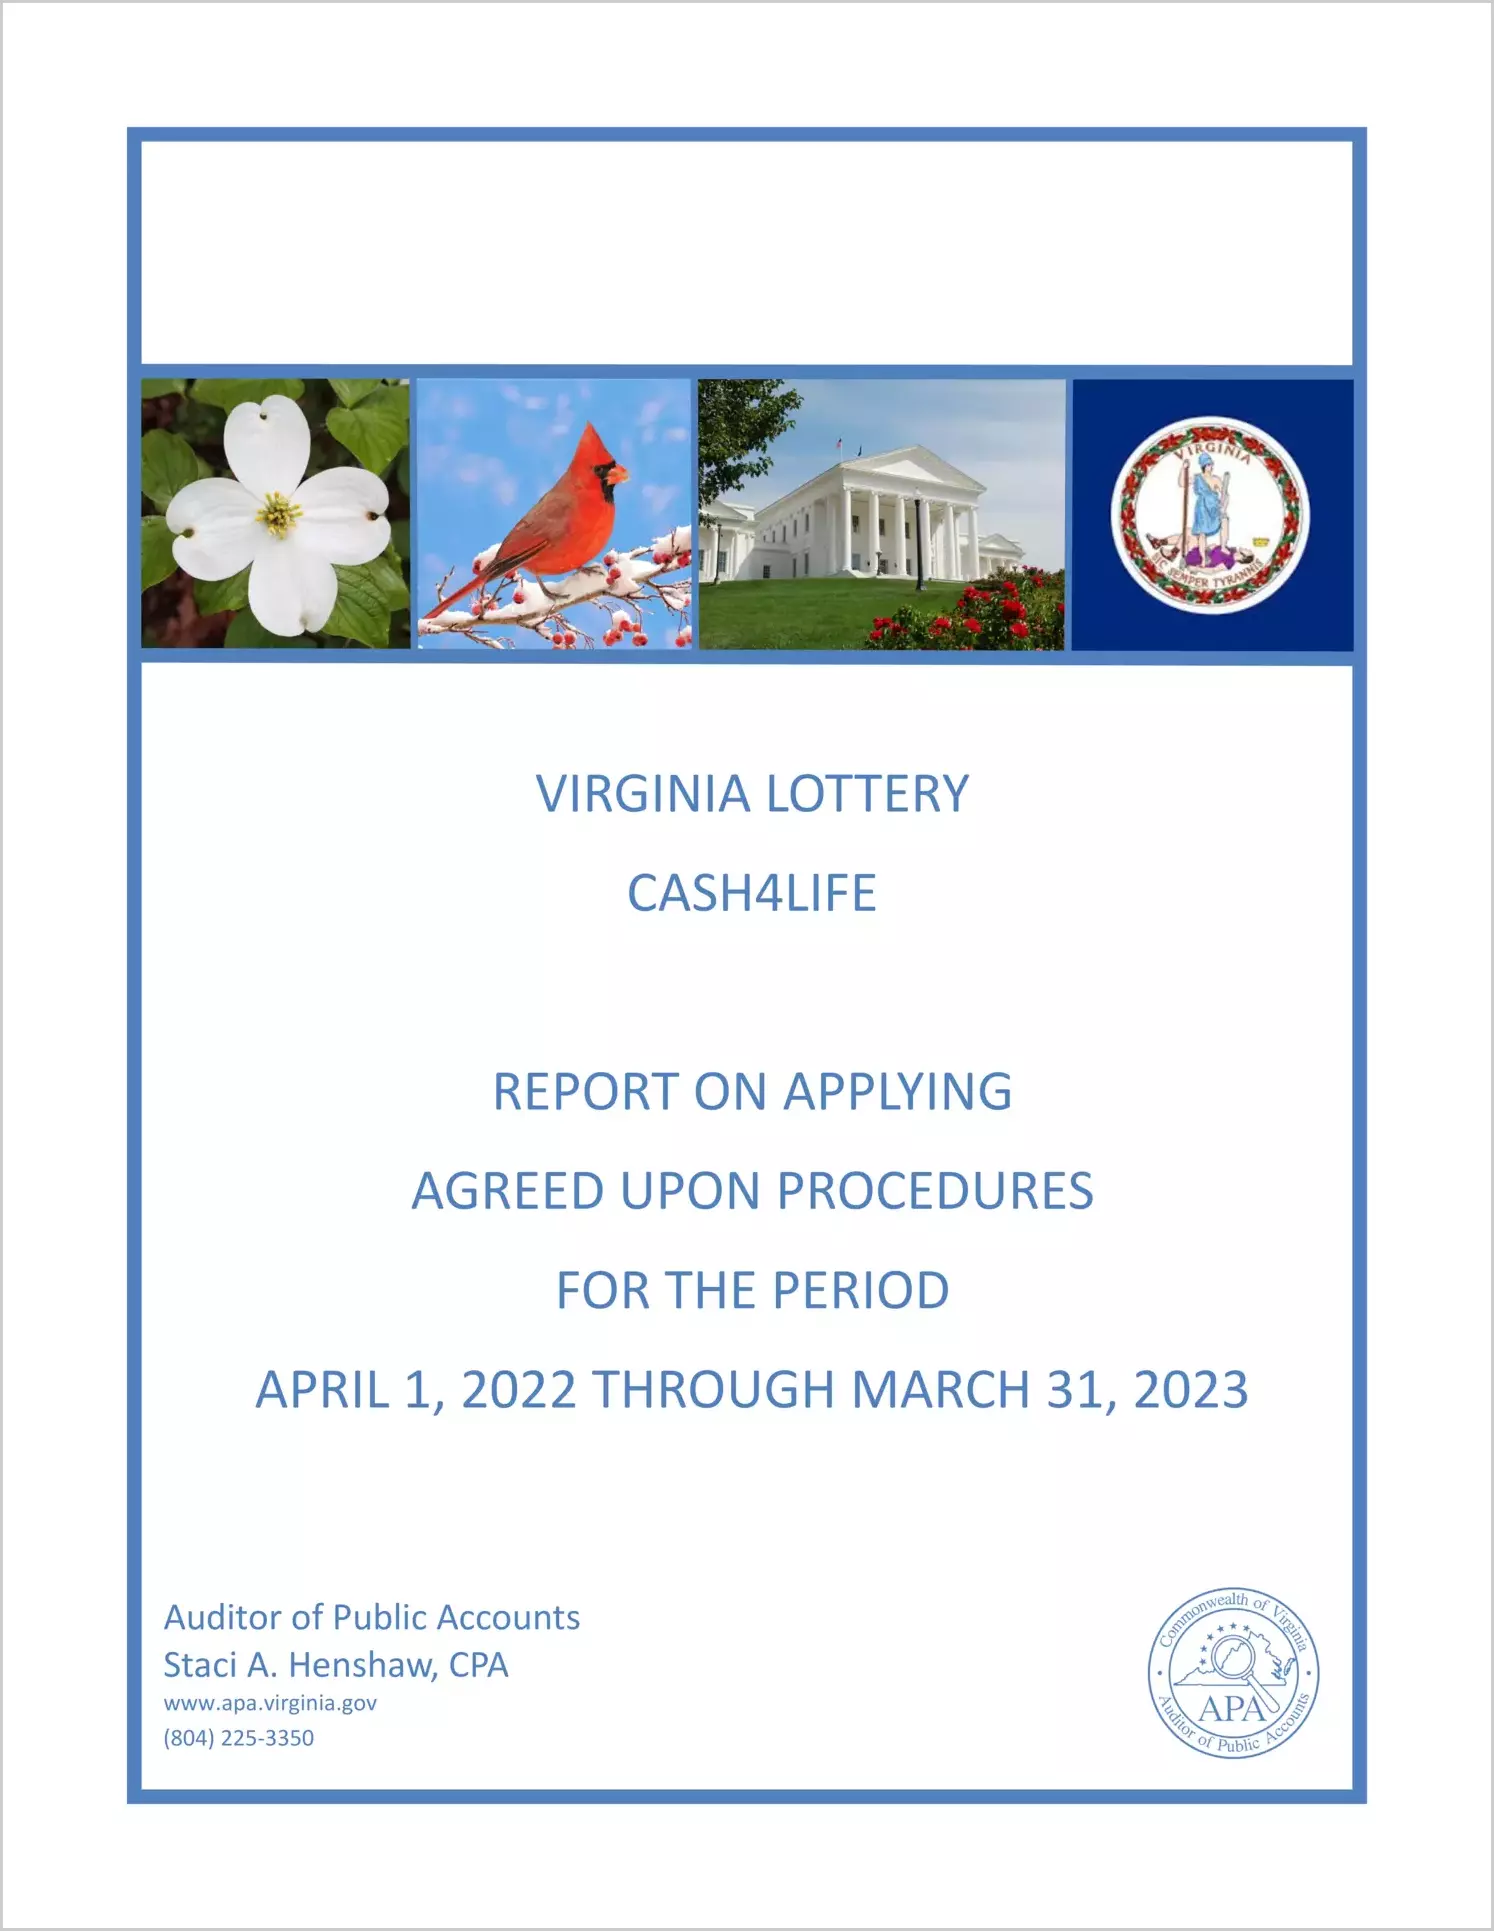 Virginia Lottery Cash4Life Report on Applying Agreed-Upon Procedures for the period April 1, 2022 through March 31, 2023